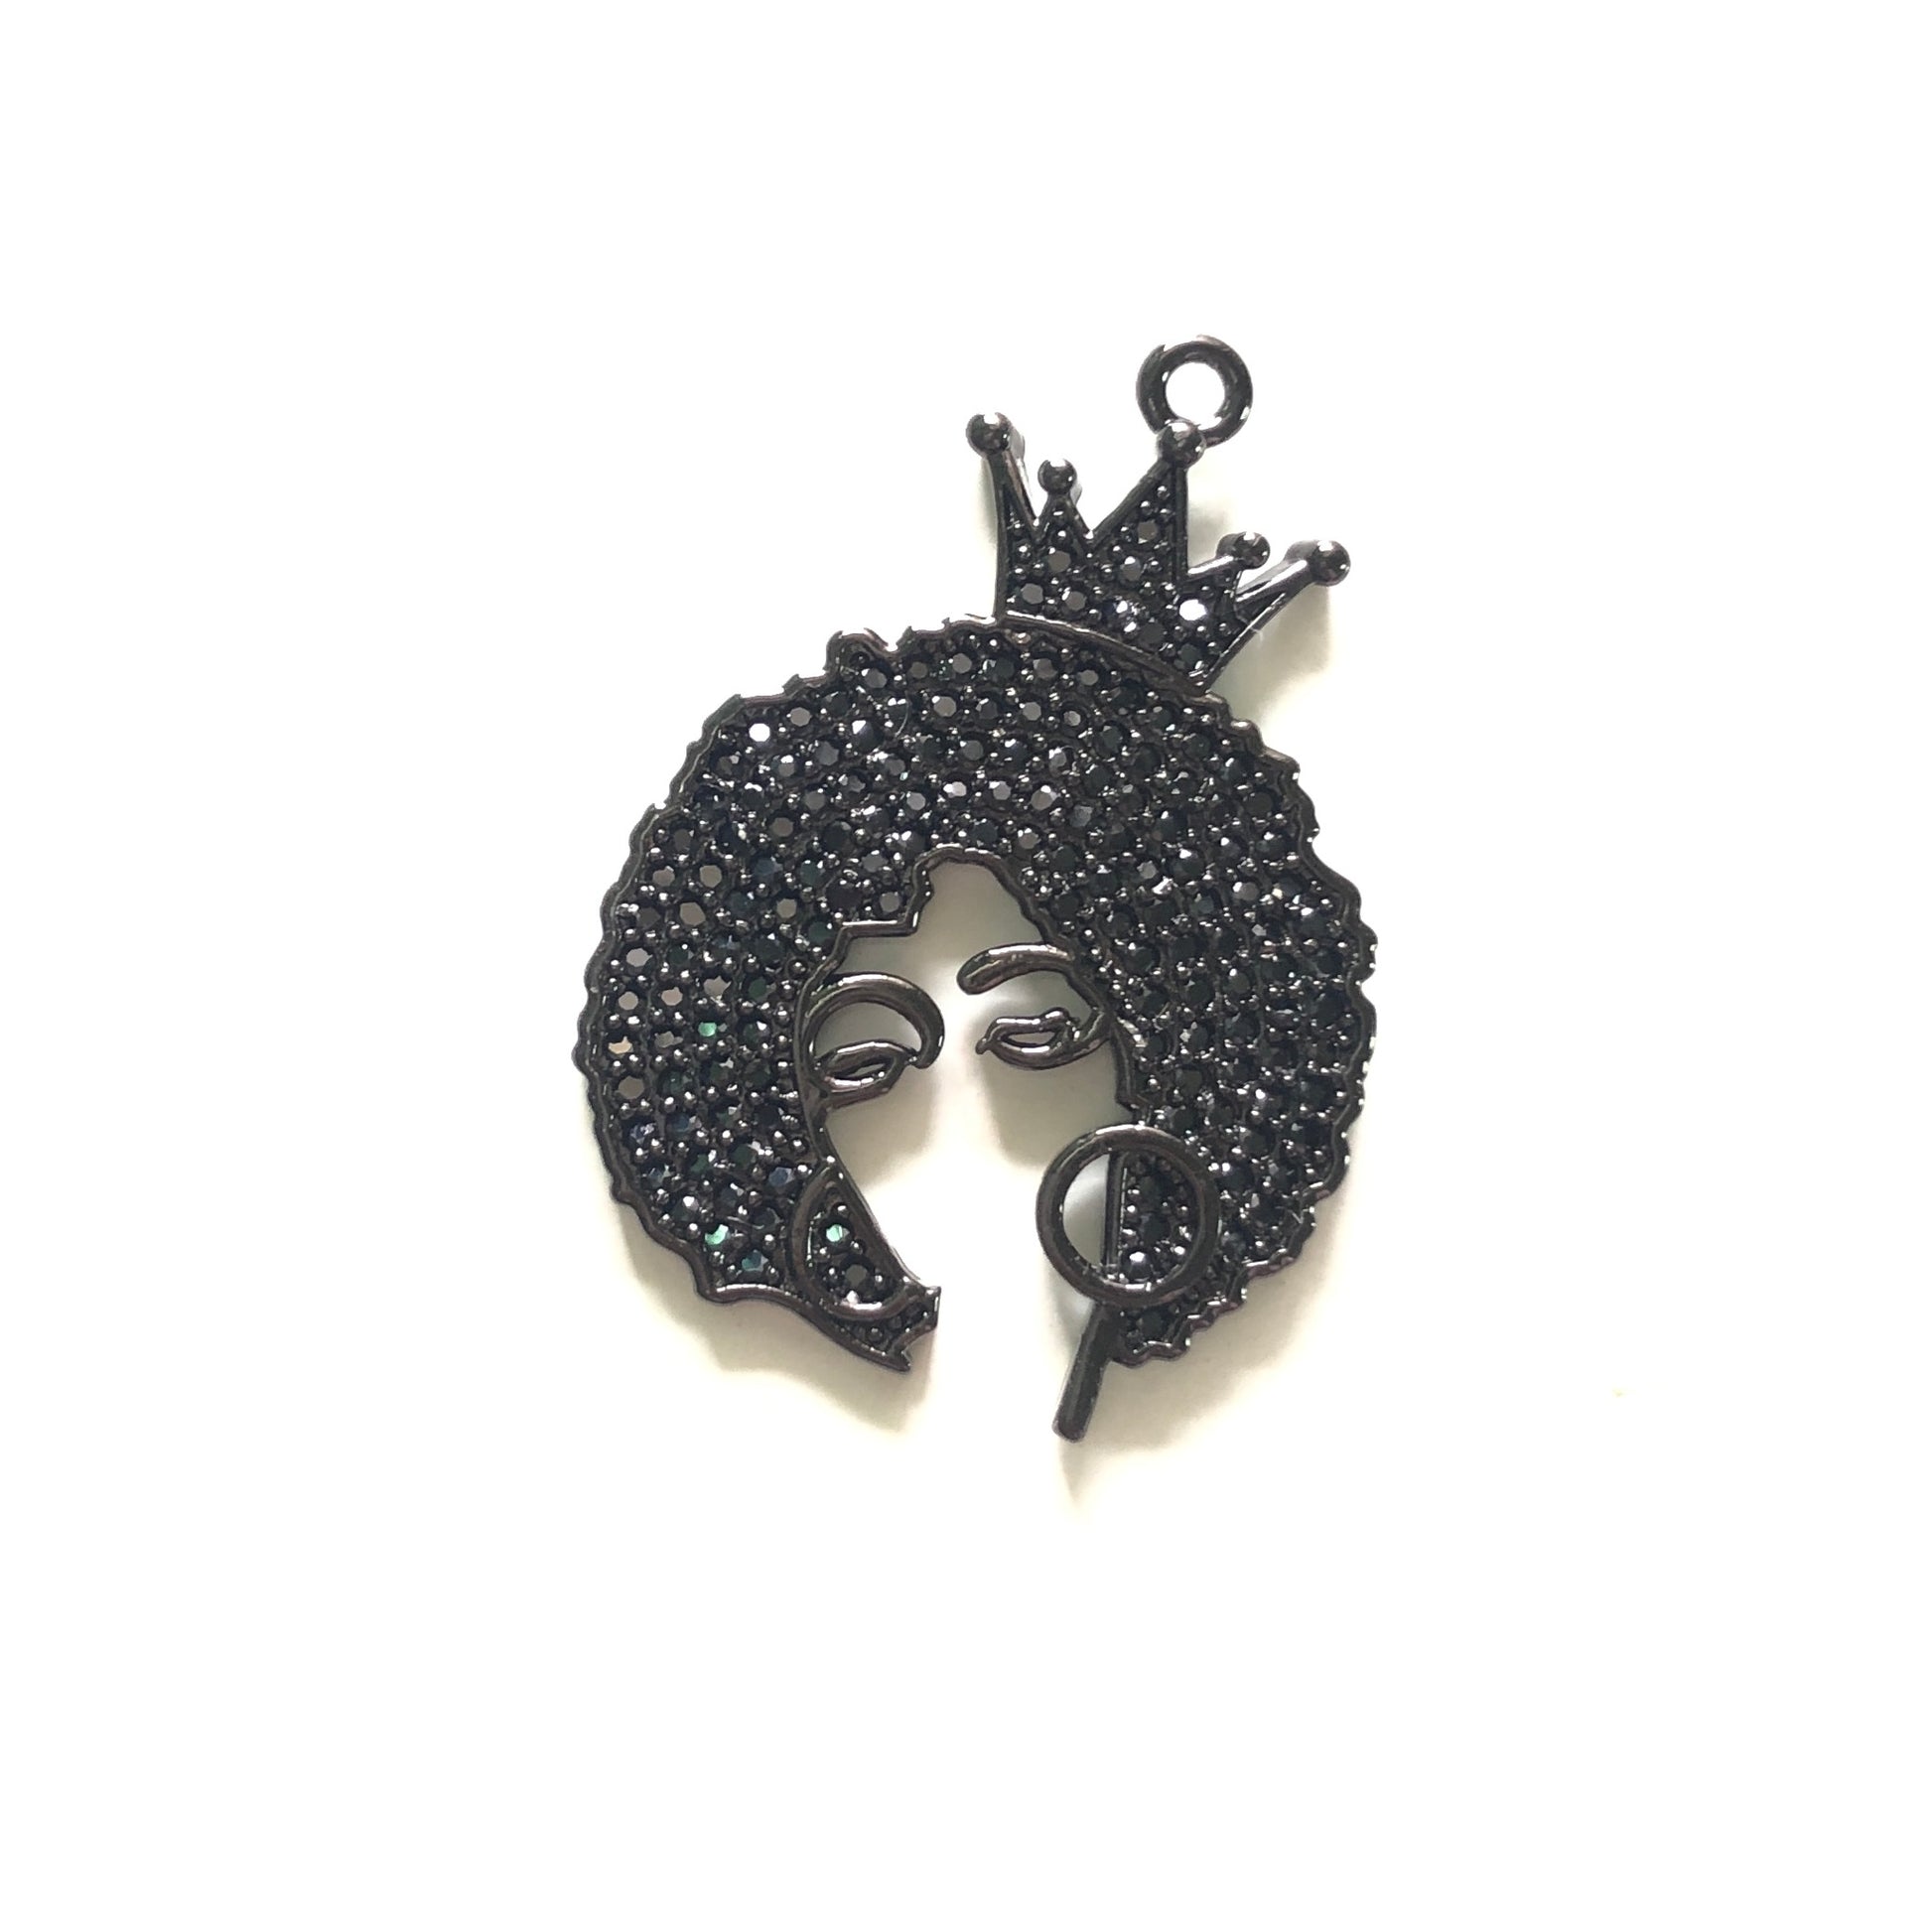 10pcs/lot 34*25mm CZ Afro Girl Black Queen Charms Black on Black CZ Paved Charms Afro Girl/Queen Charms On Sale Charms Beads Beyond